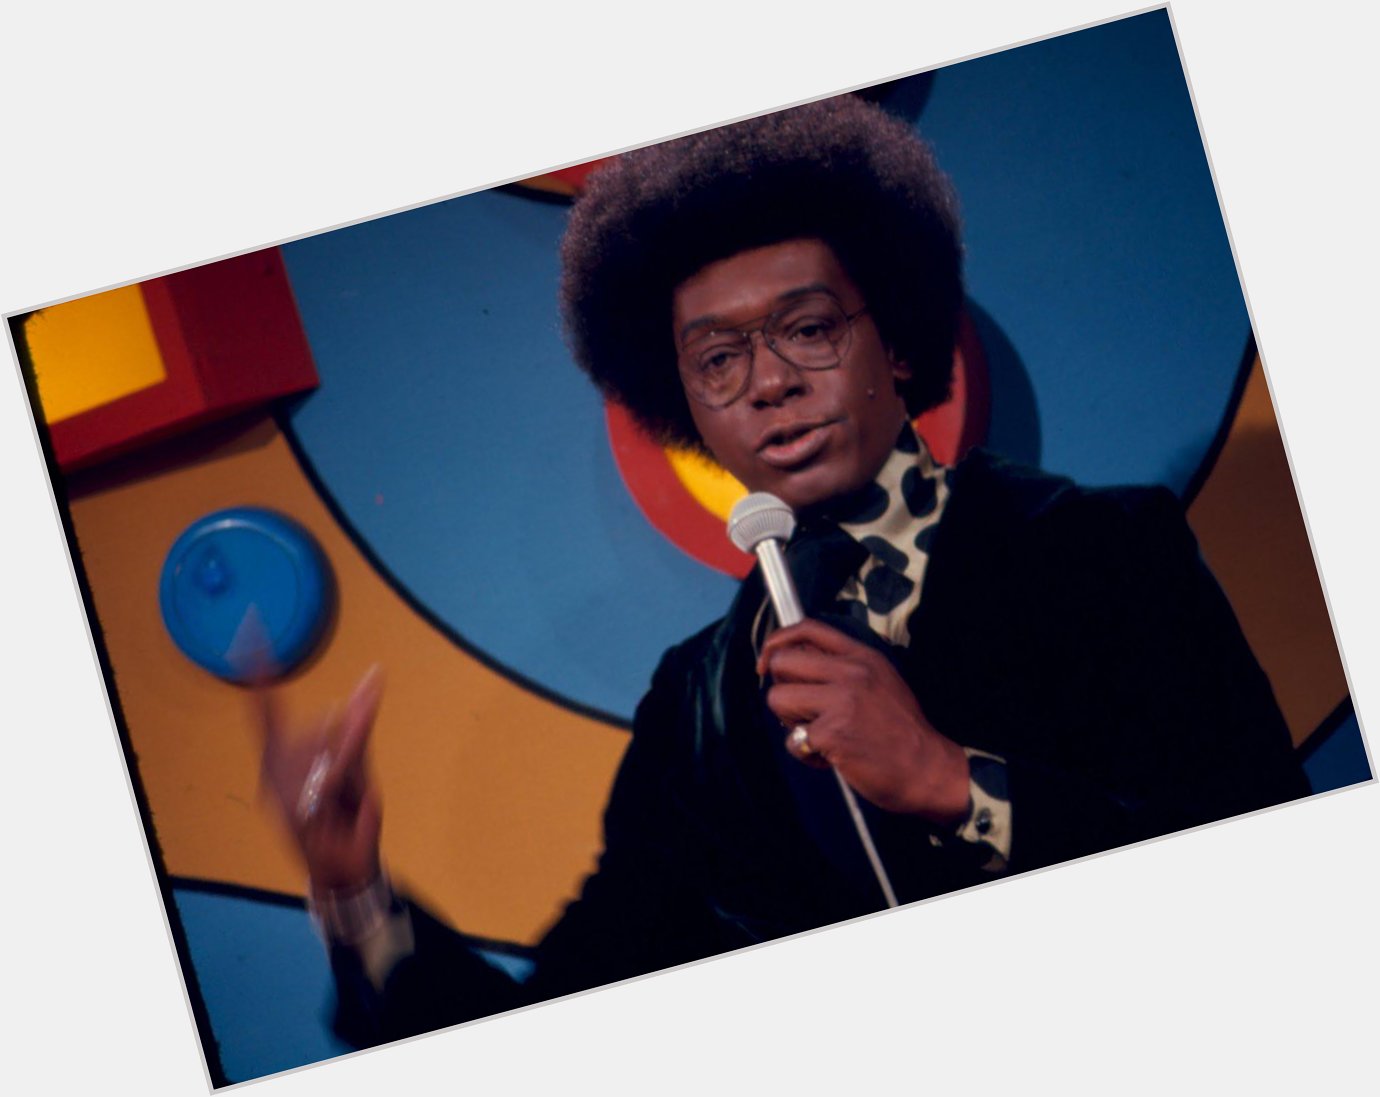 Happy Birthday to Don Cornelius, who would have turned 79 today! 